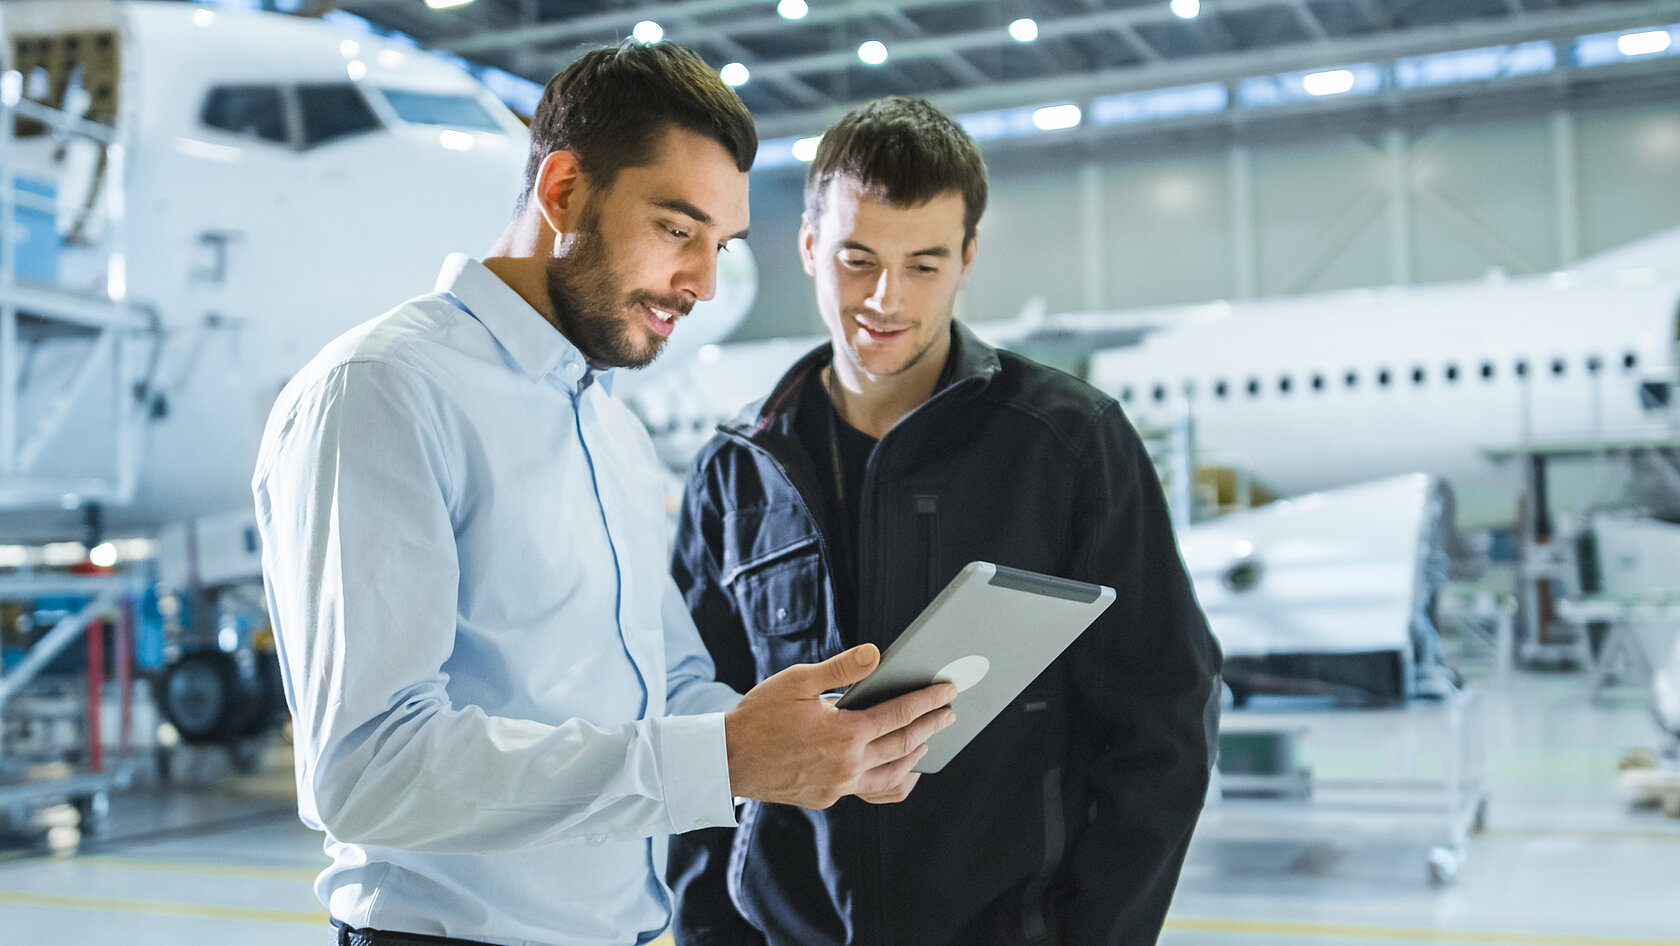 two engineers looking at tablet in aircraft hangar